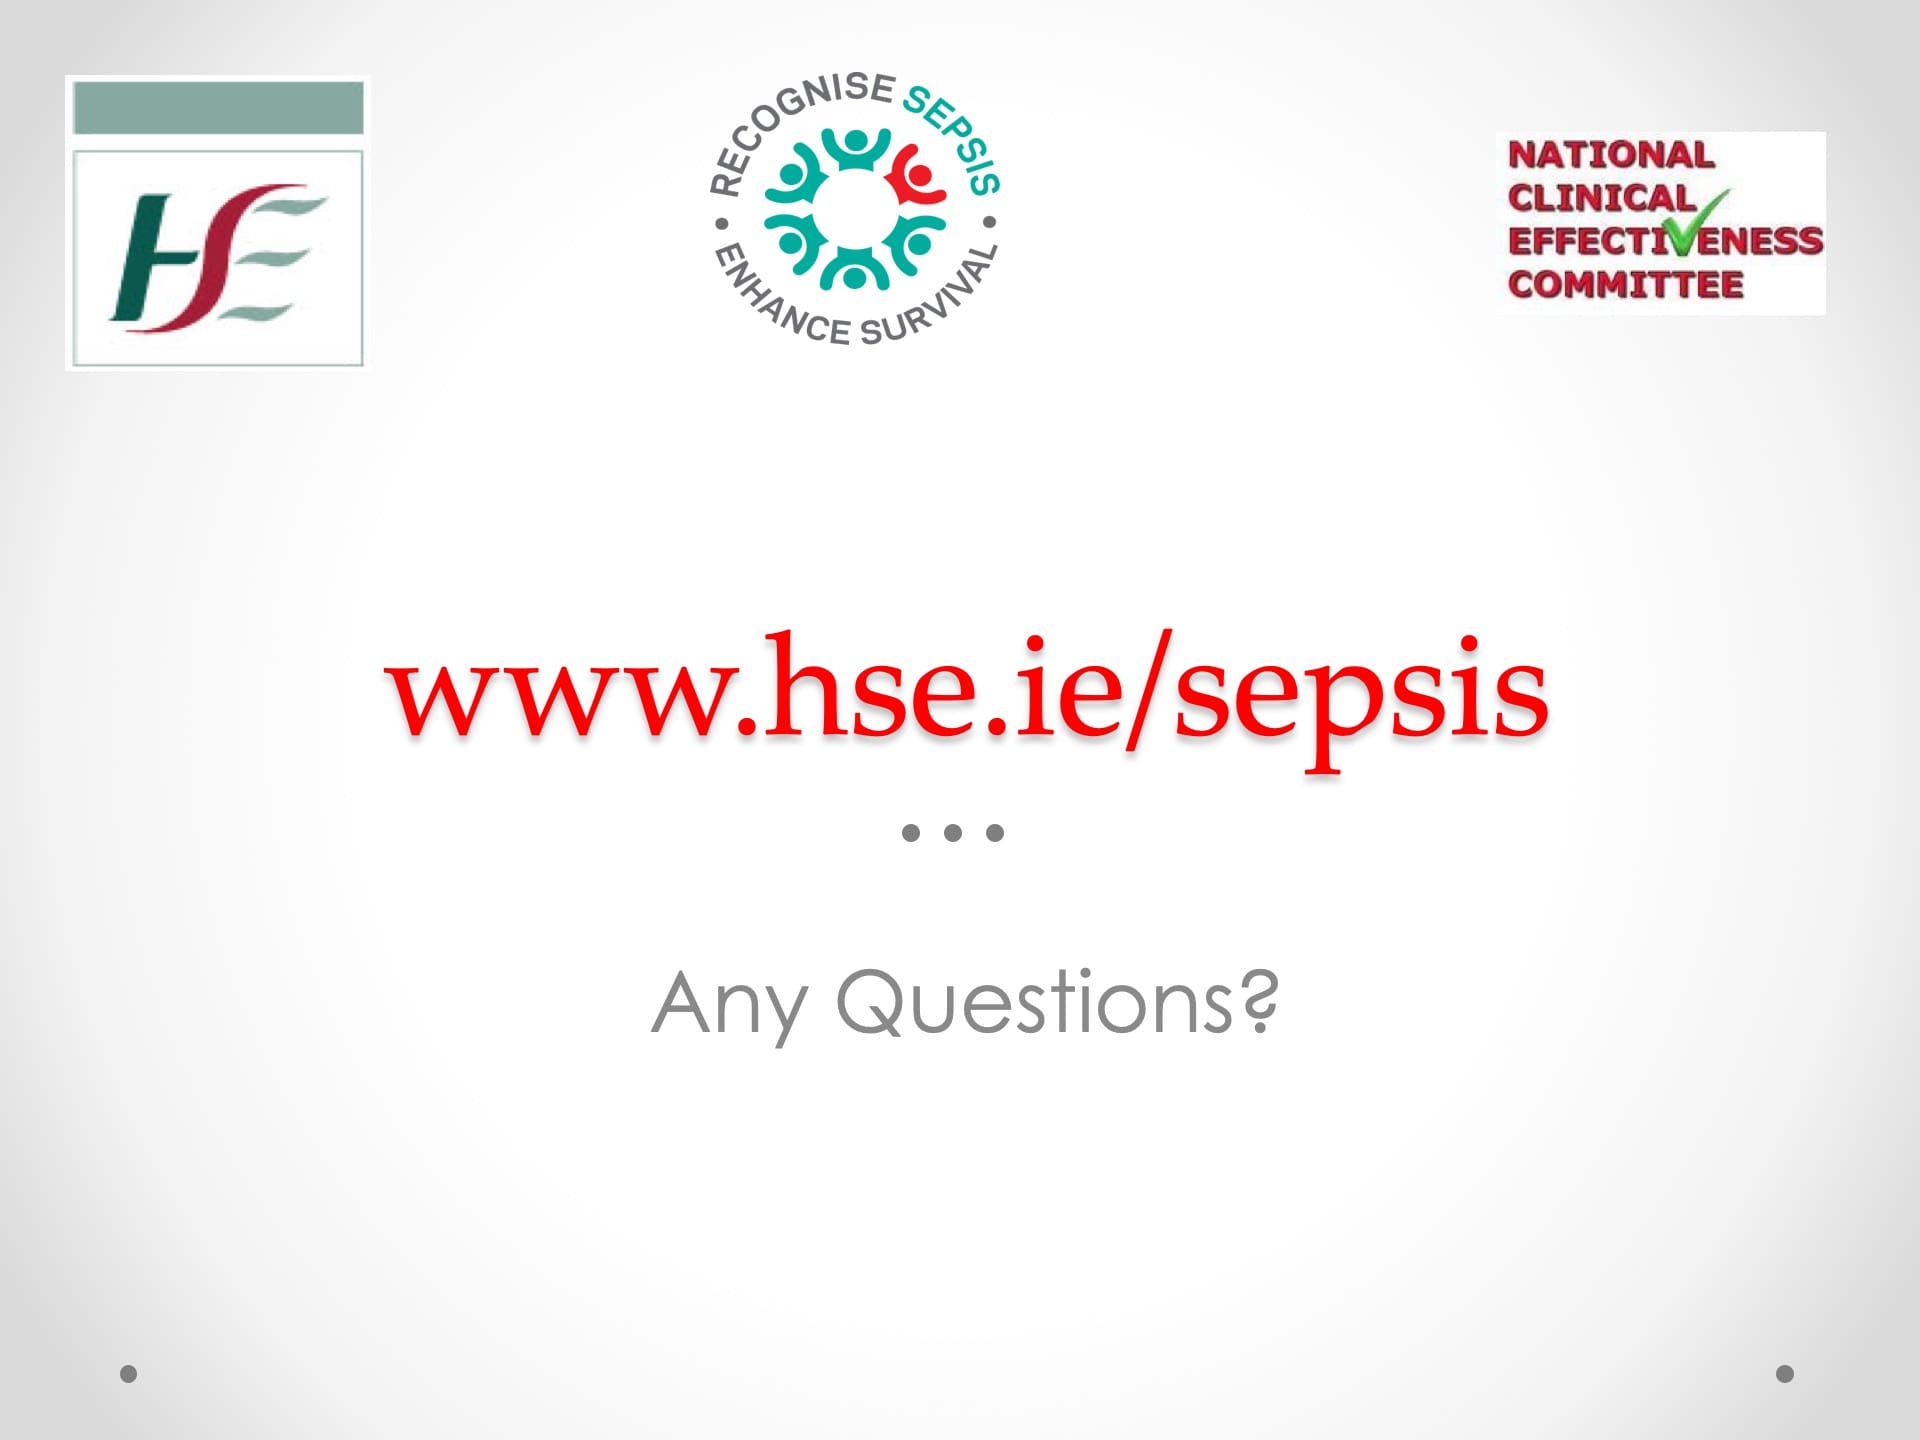 The National Sepsis Plan in Ireland24.jpeg